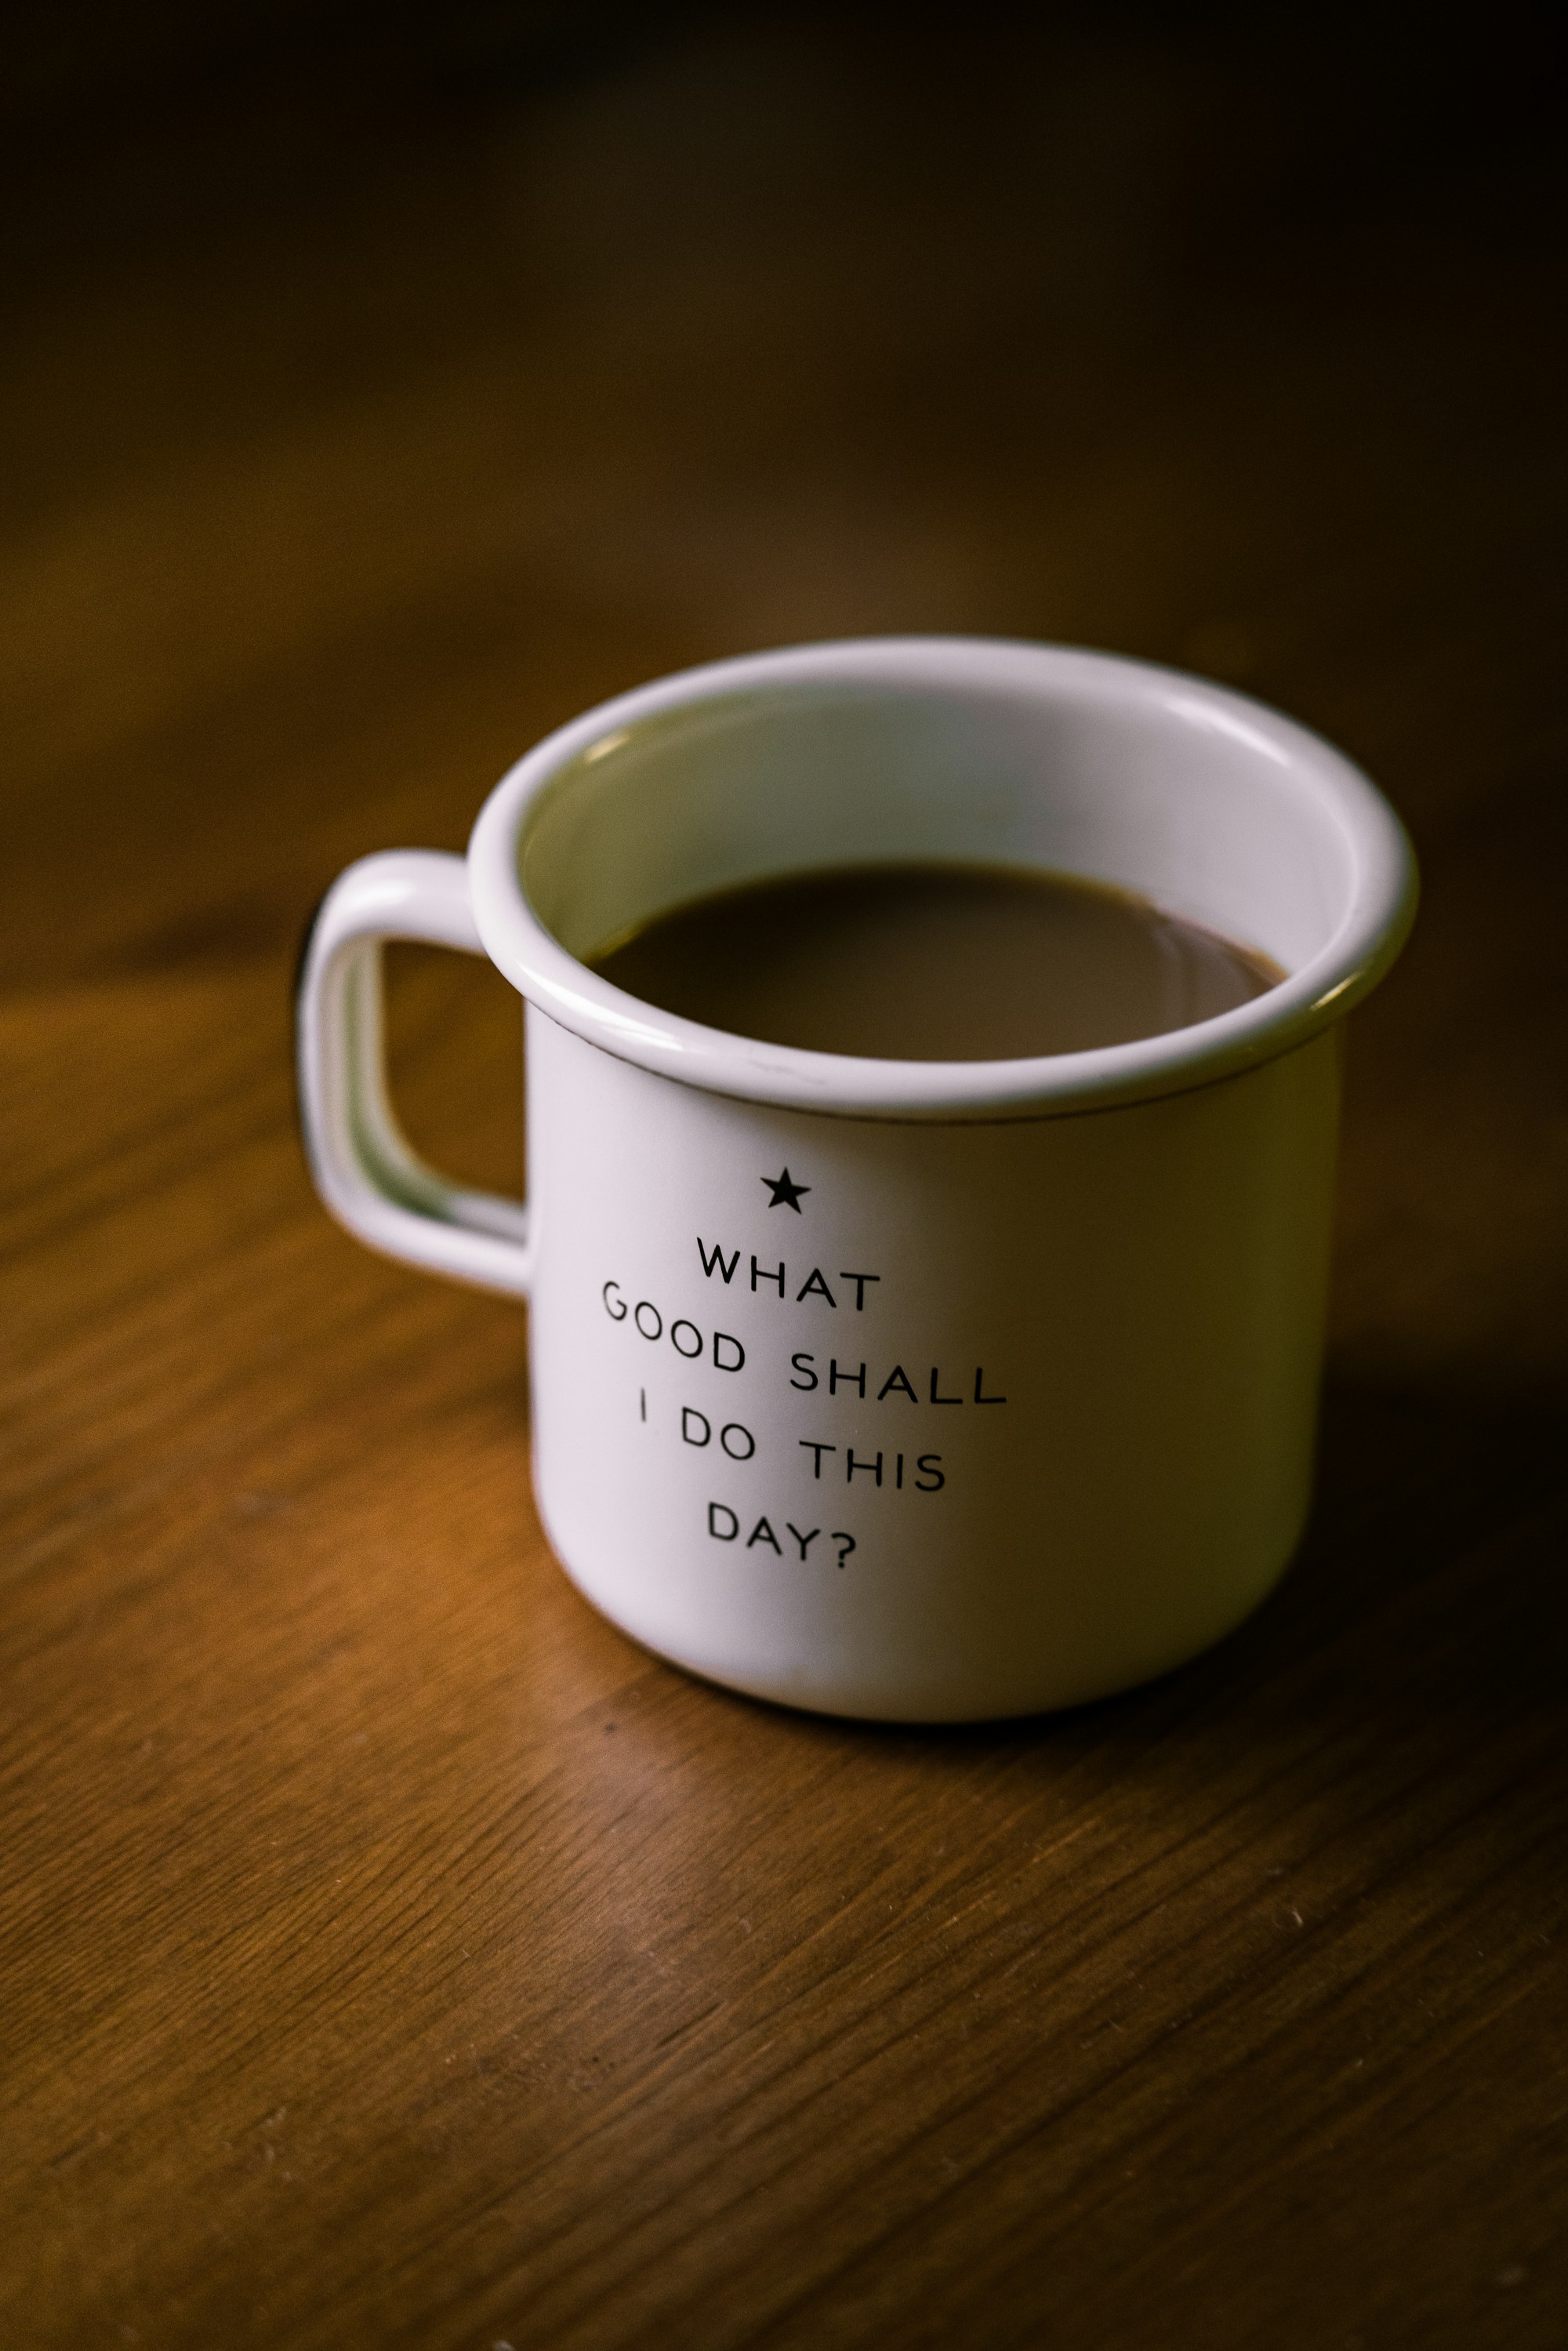 It’s just the small things, but maybe it’s all small things. This cup from Best Made is perhaps a good reminder of that.